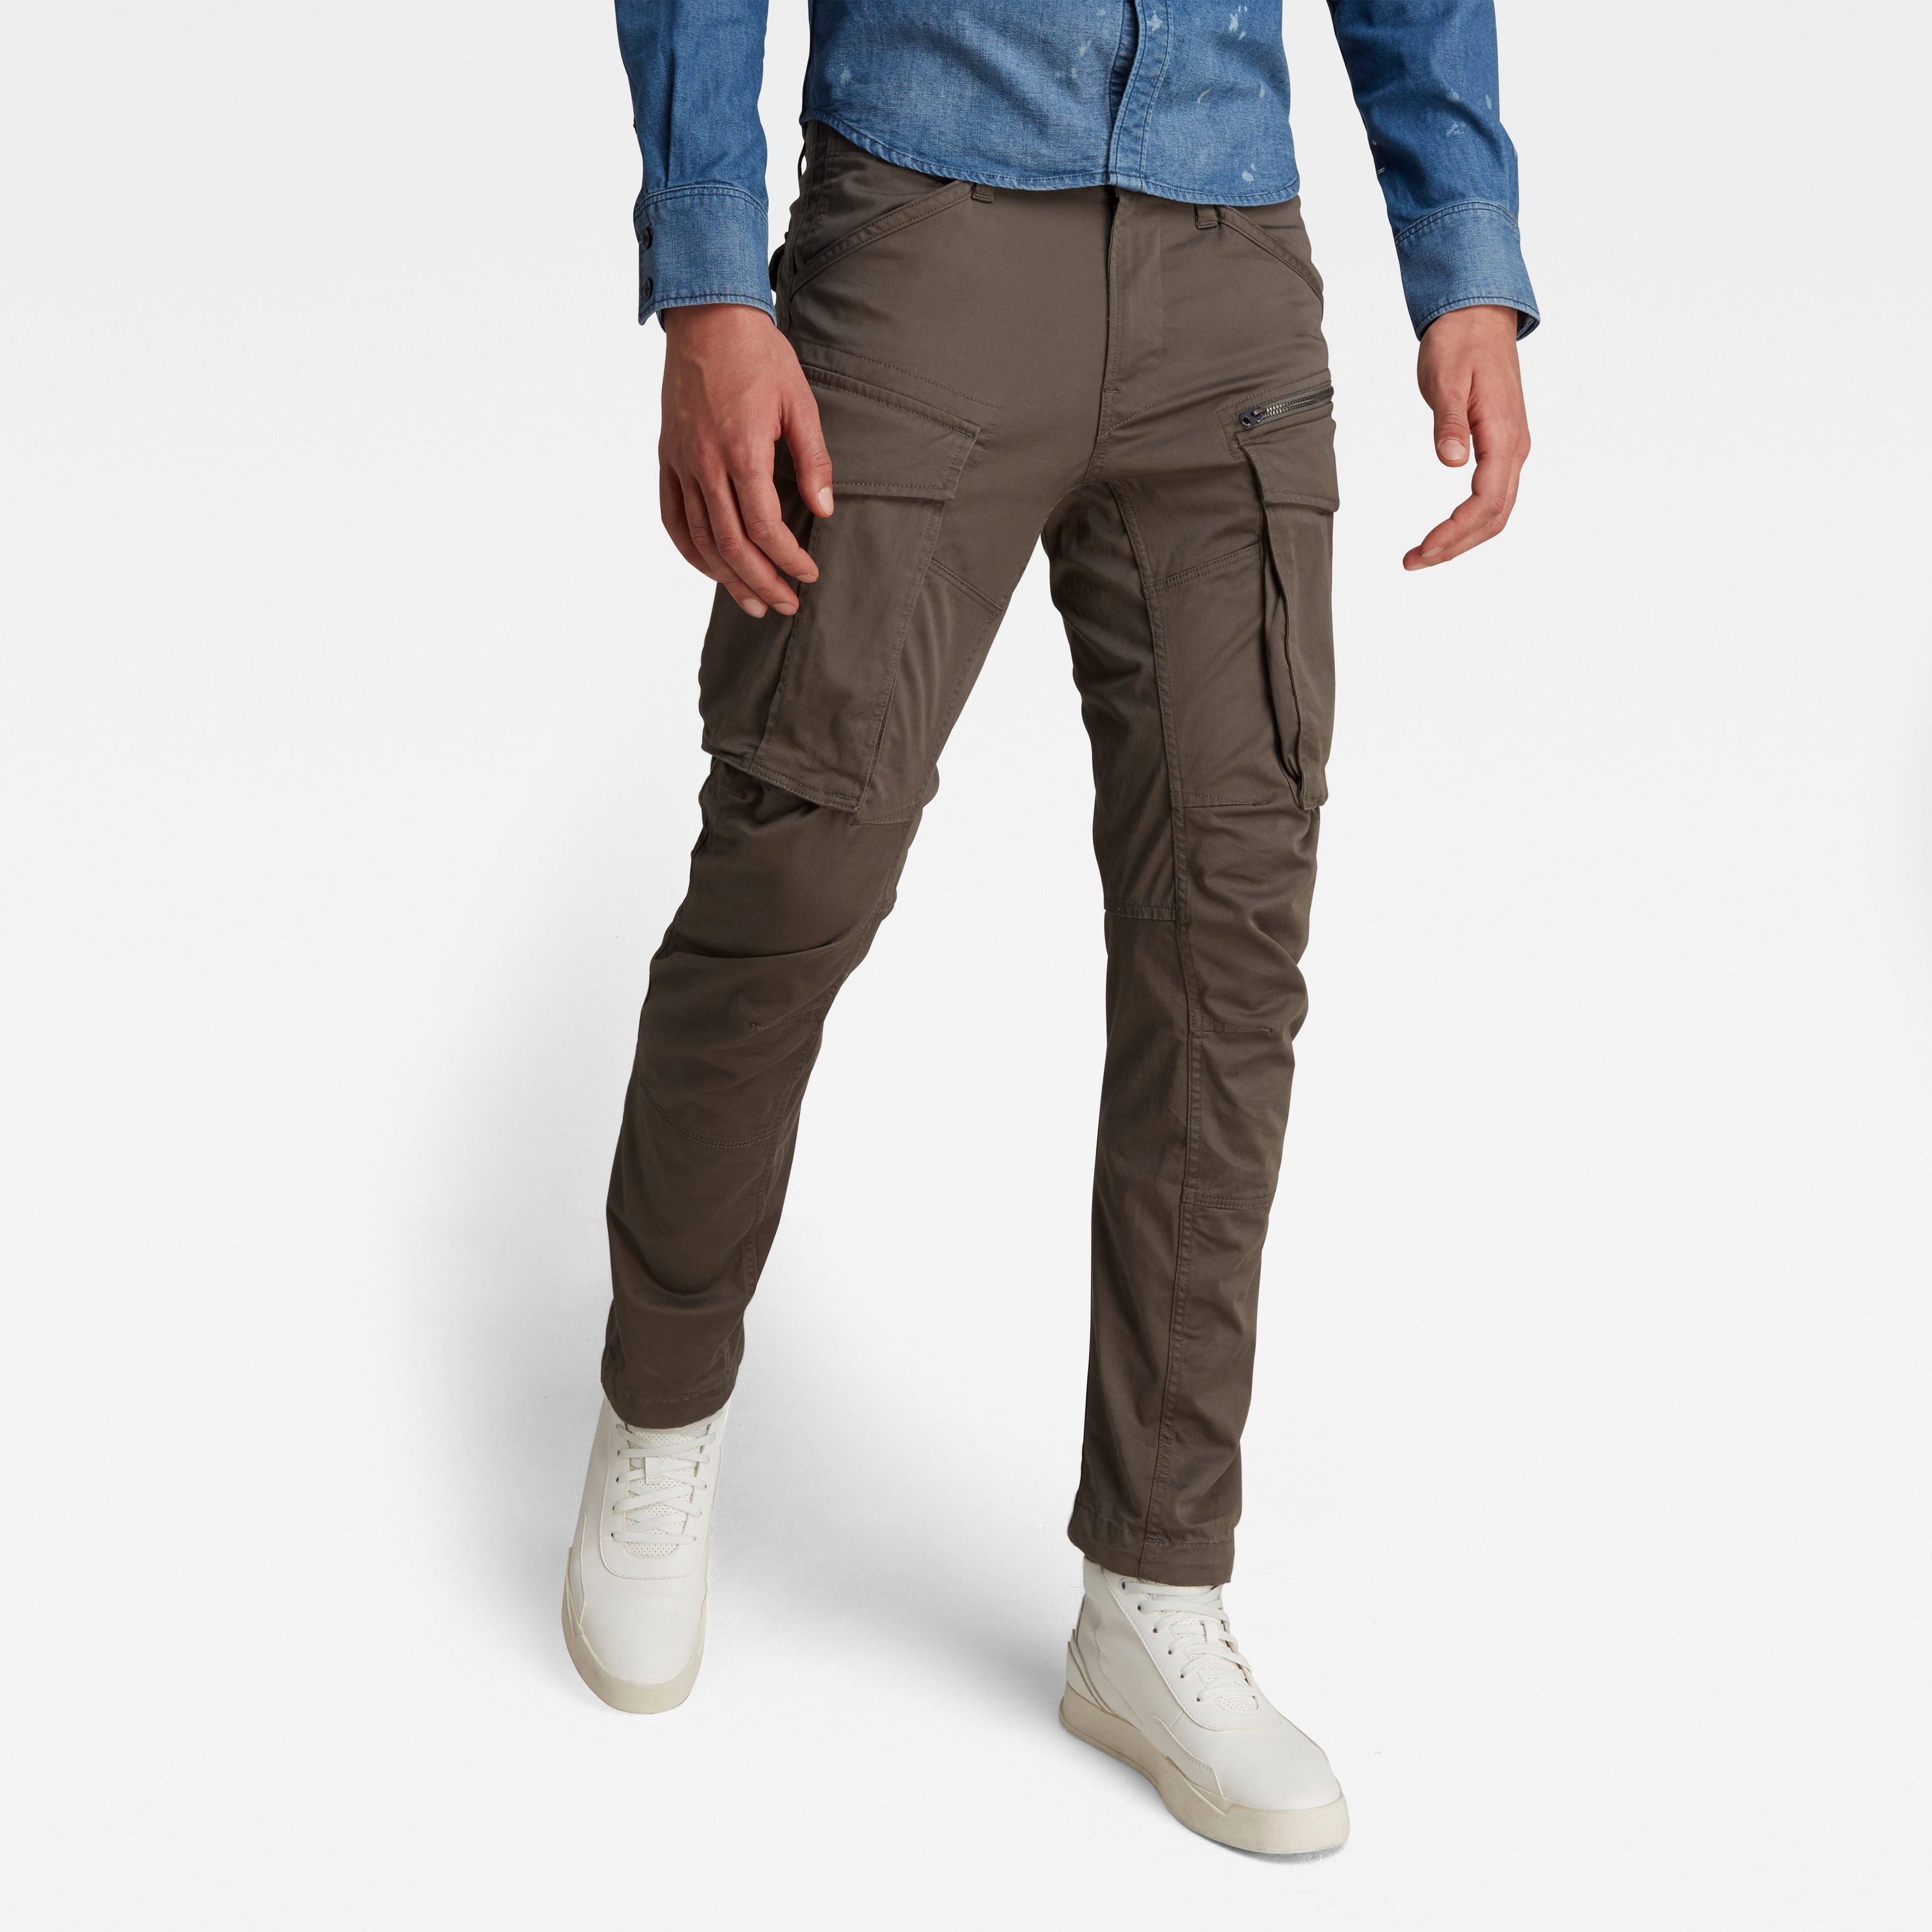 Buy G Star Grey Cargo Pants at In Style –